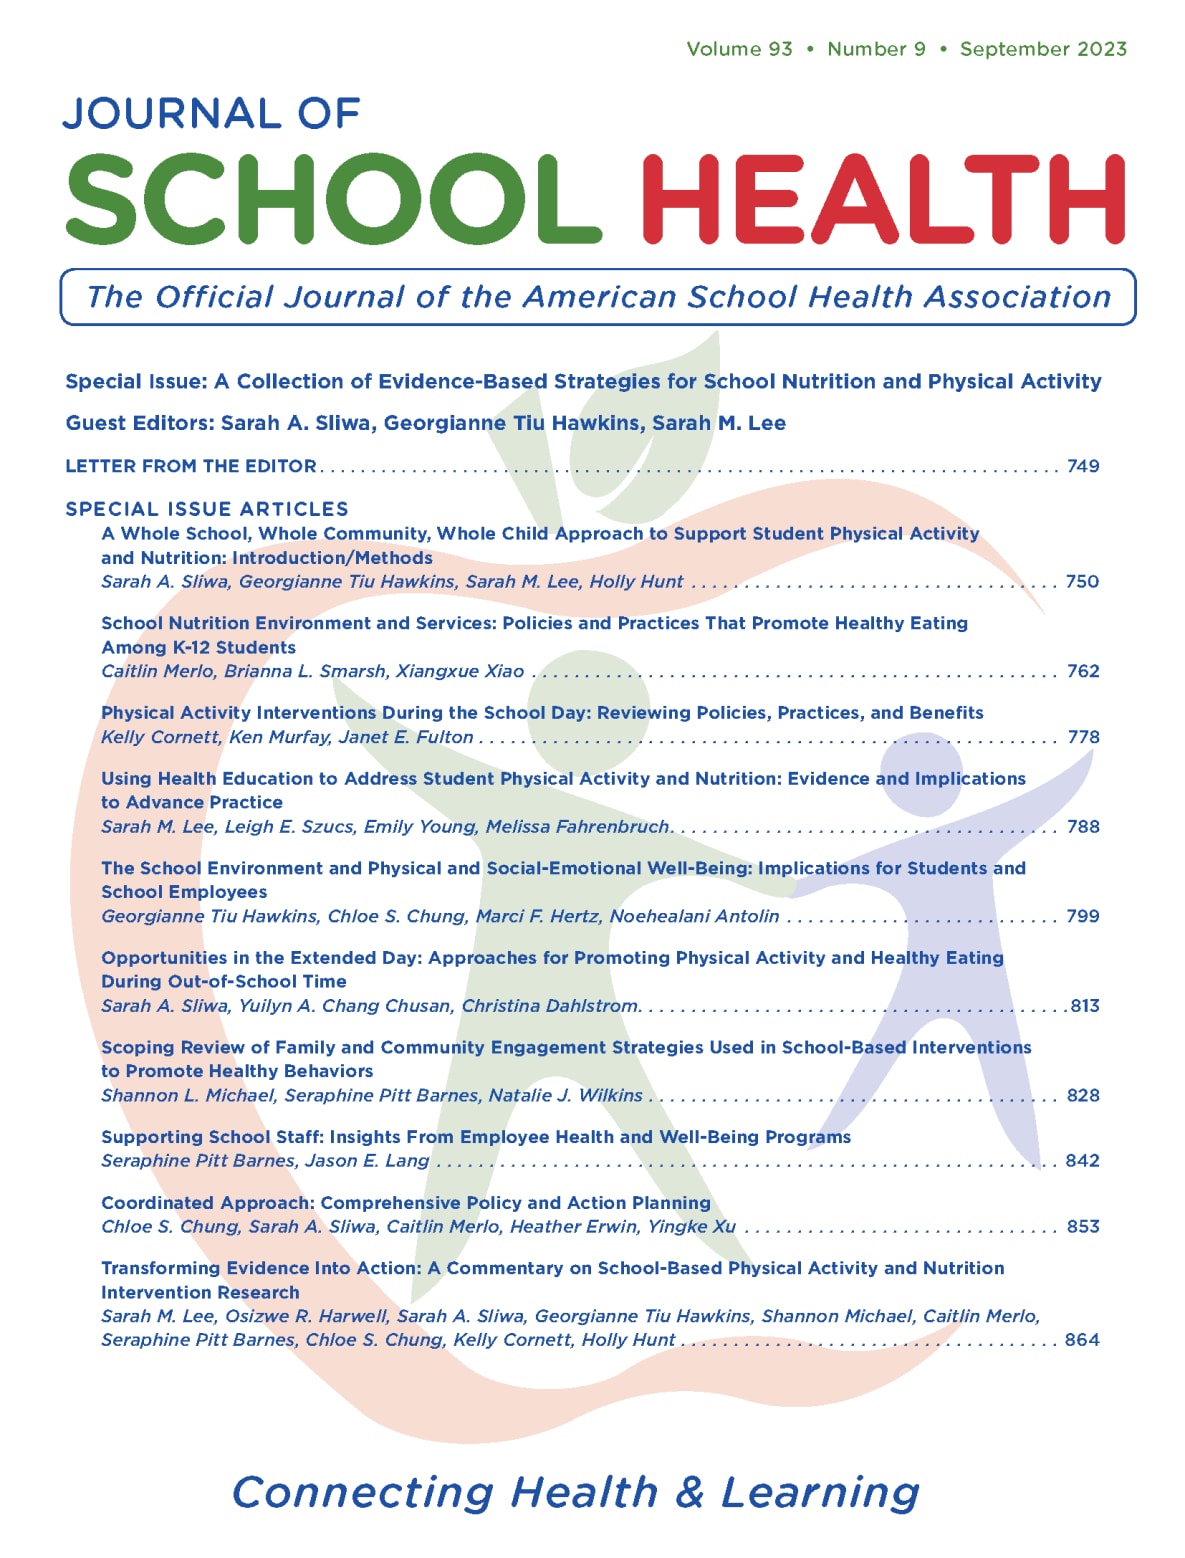 Cover image: Transforming Evidence Into Action: A Commentary on the School-Based Research using the Whole School, Whole Community, and Whole Child (WSCC) Framework